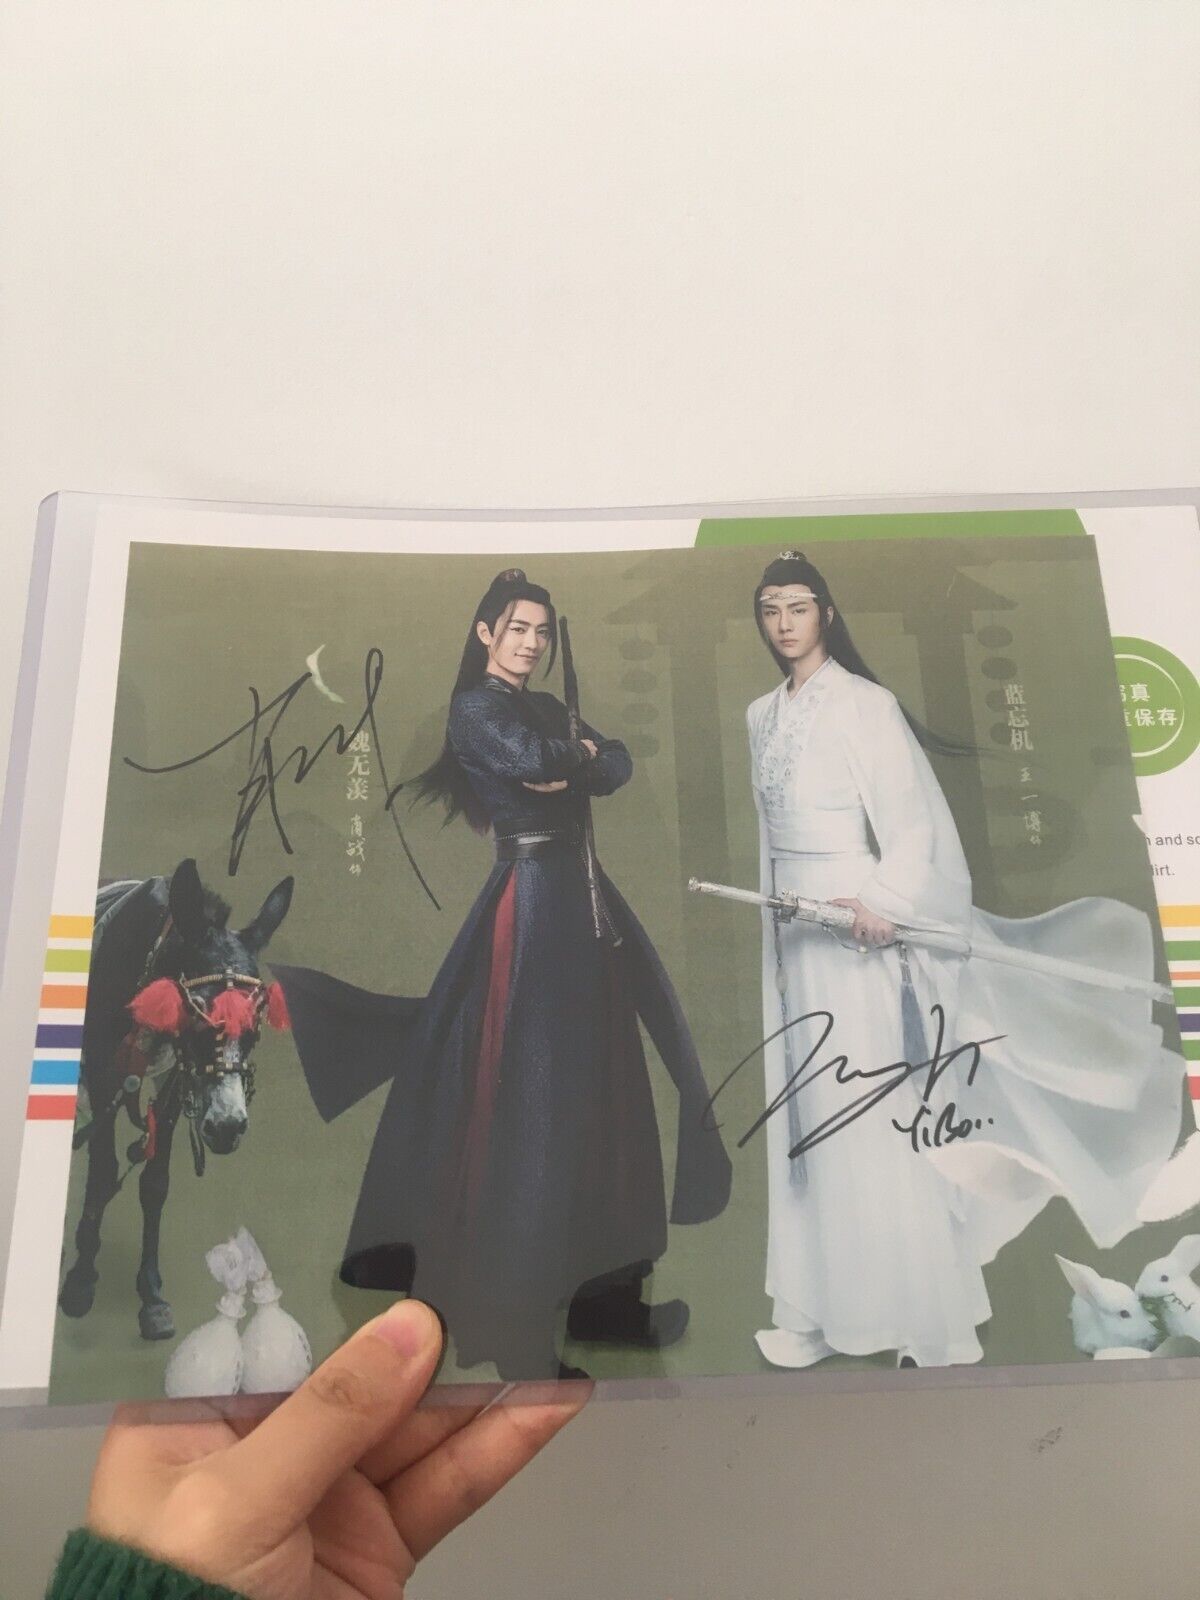 SALE Xiao Zhan YIBO CHEN QING LING Autographed Signed Photo Poster 8*10 2021